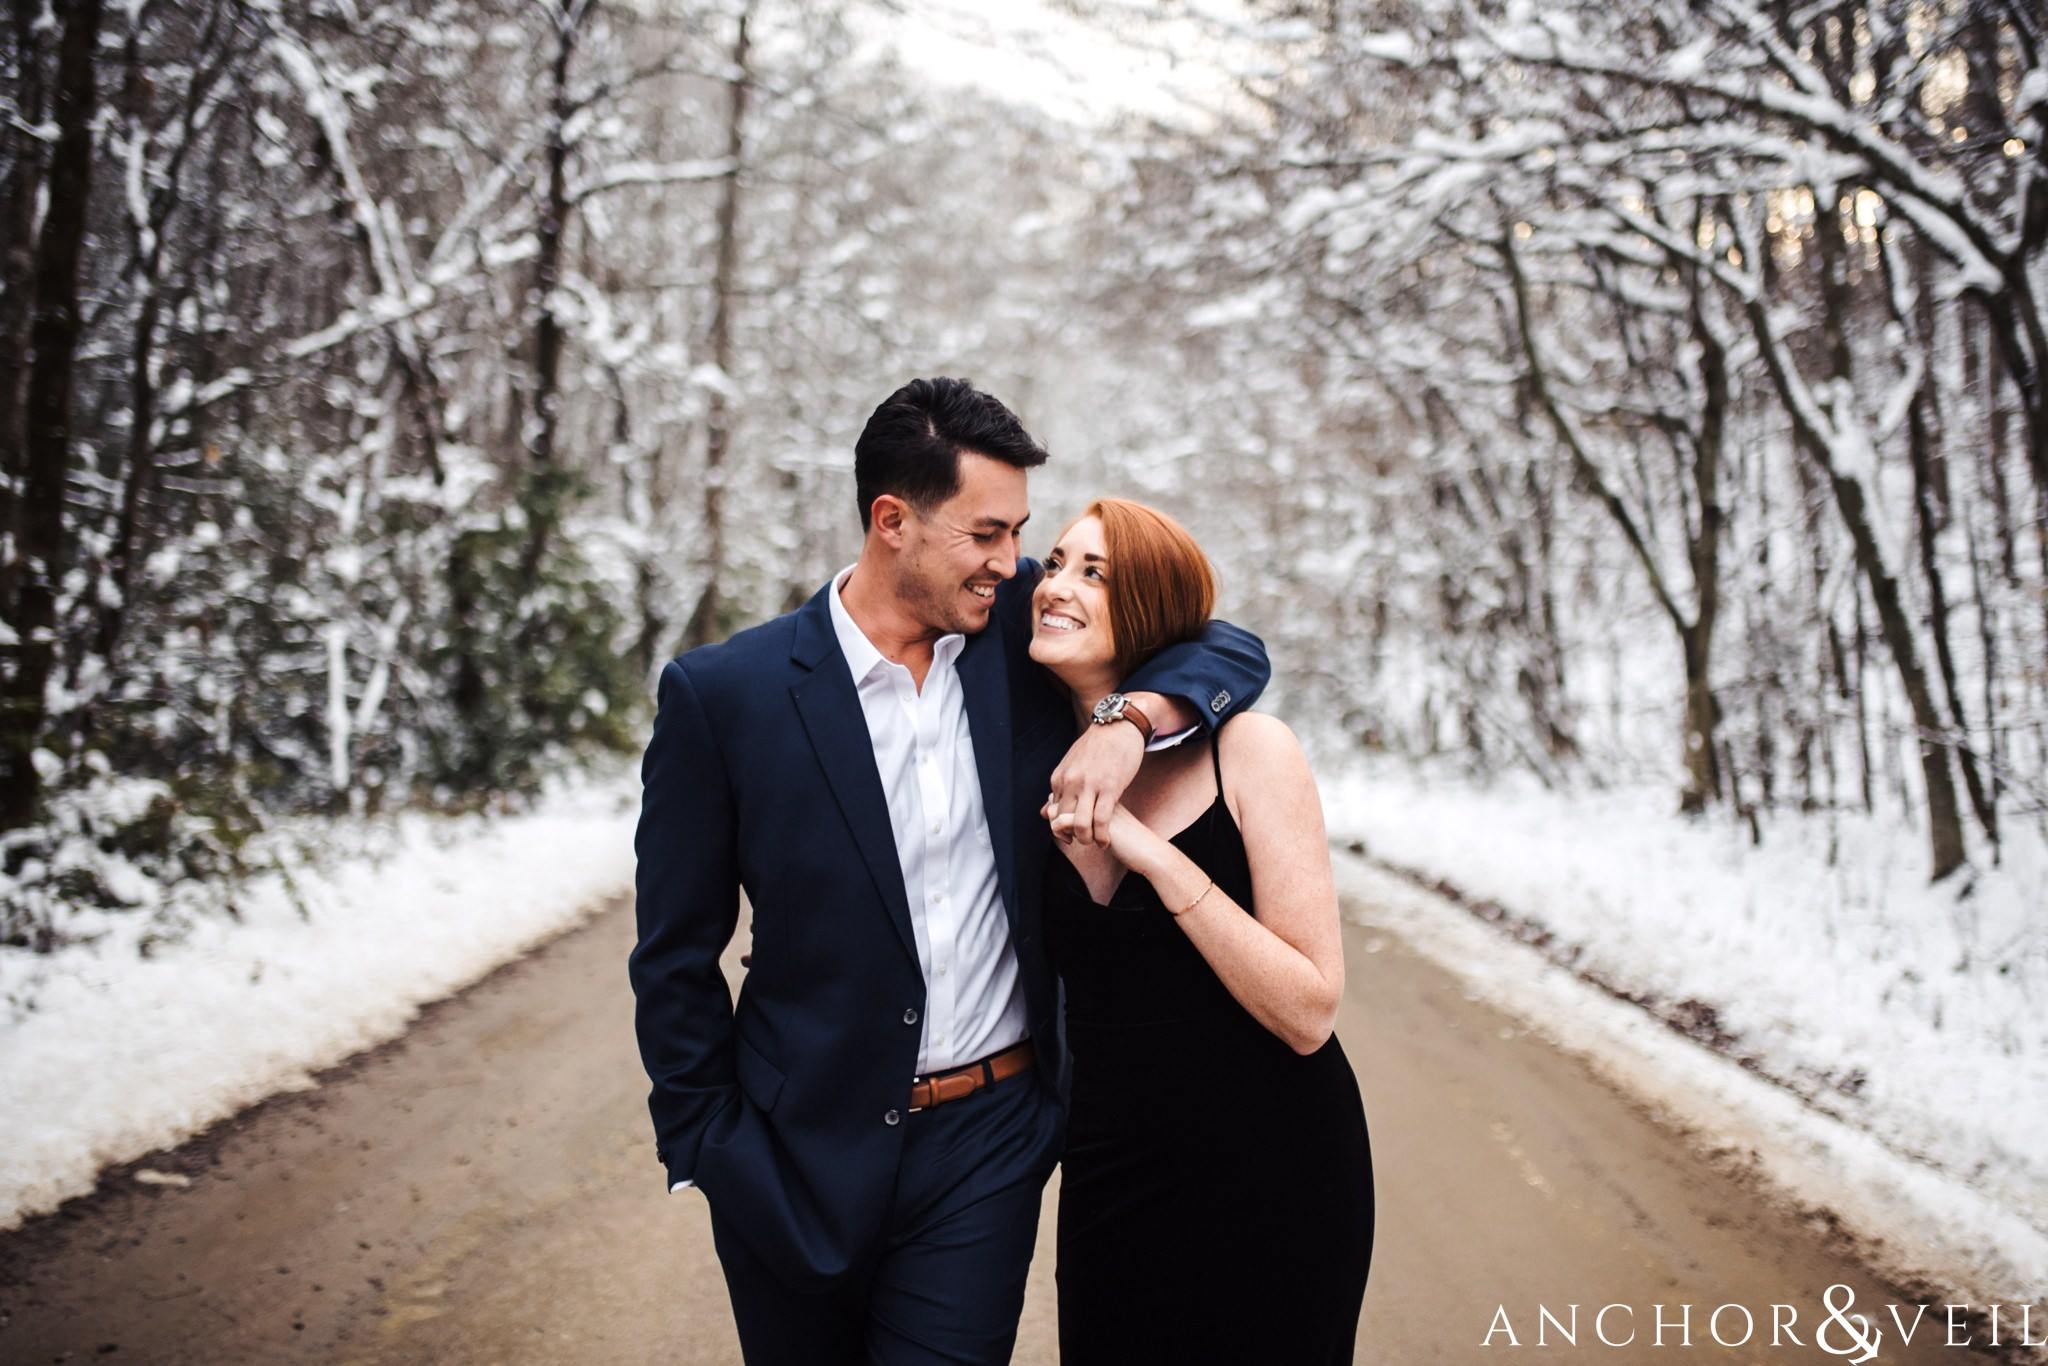 walking down the road holding each other during their Snowy Asheville Engagement Session